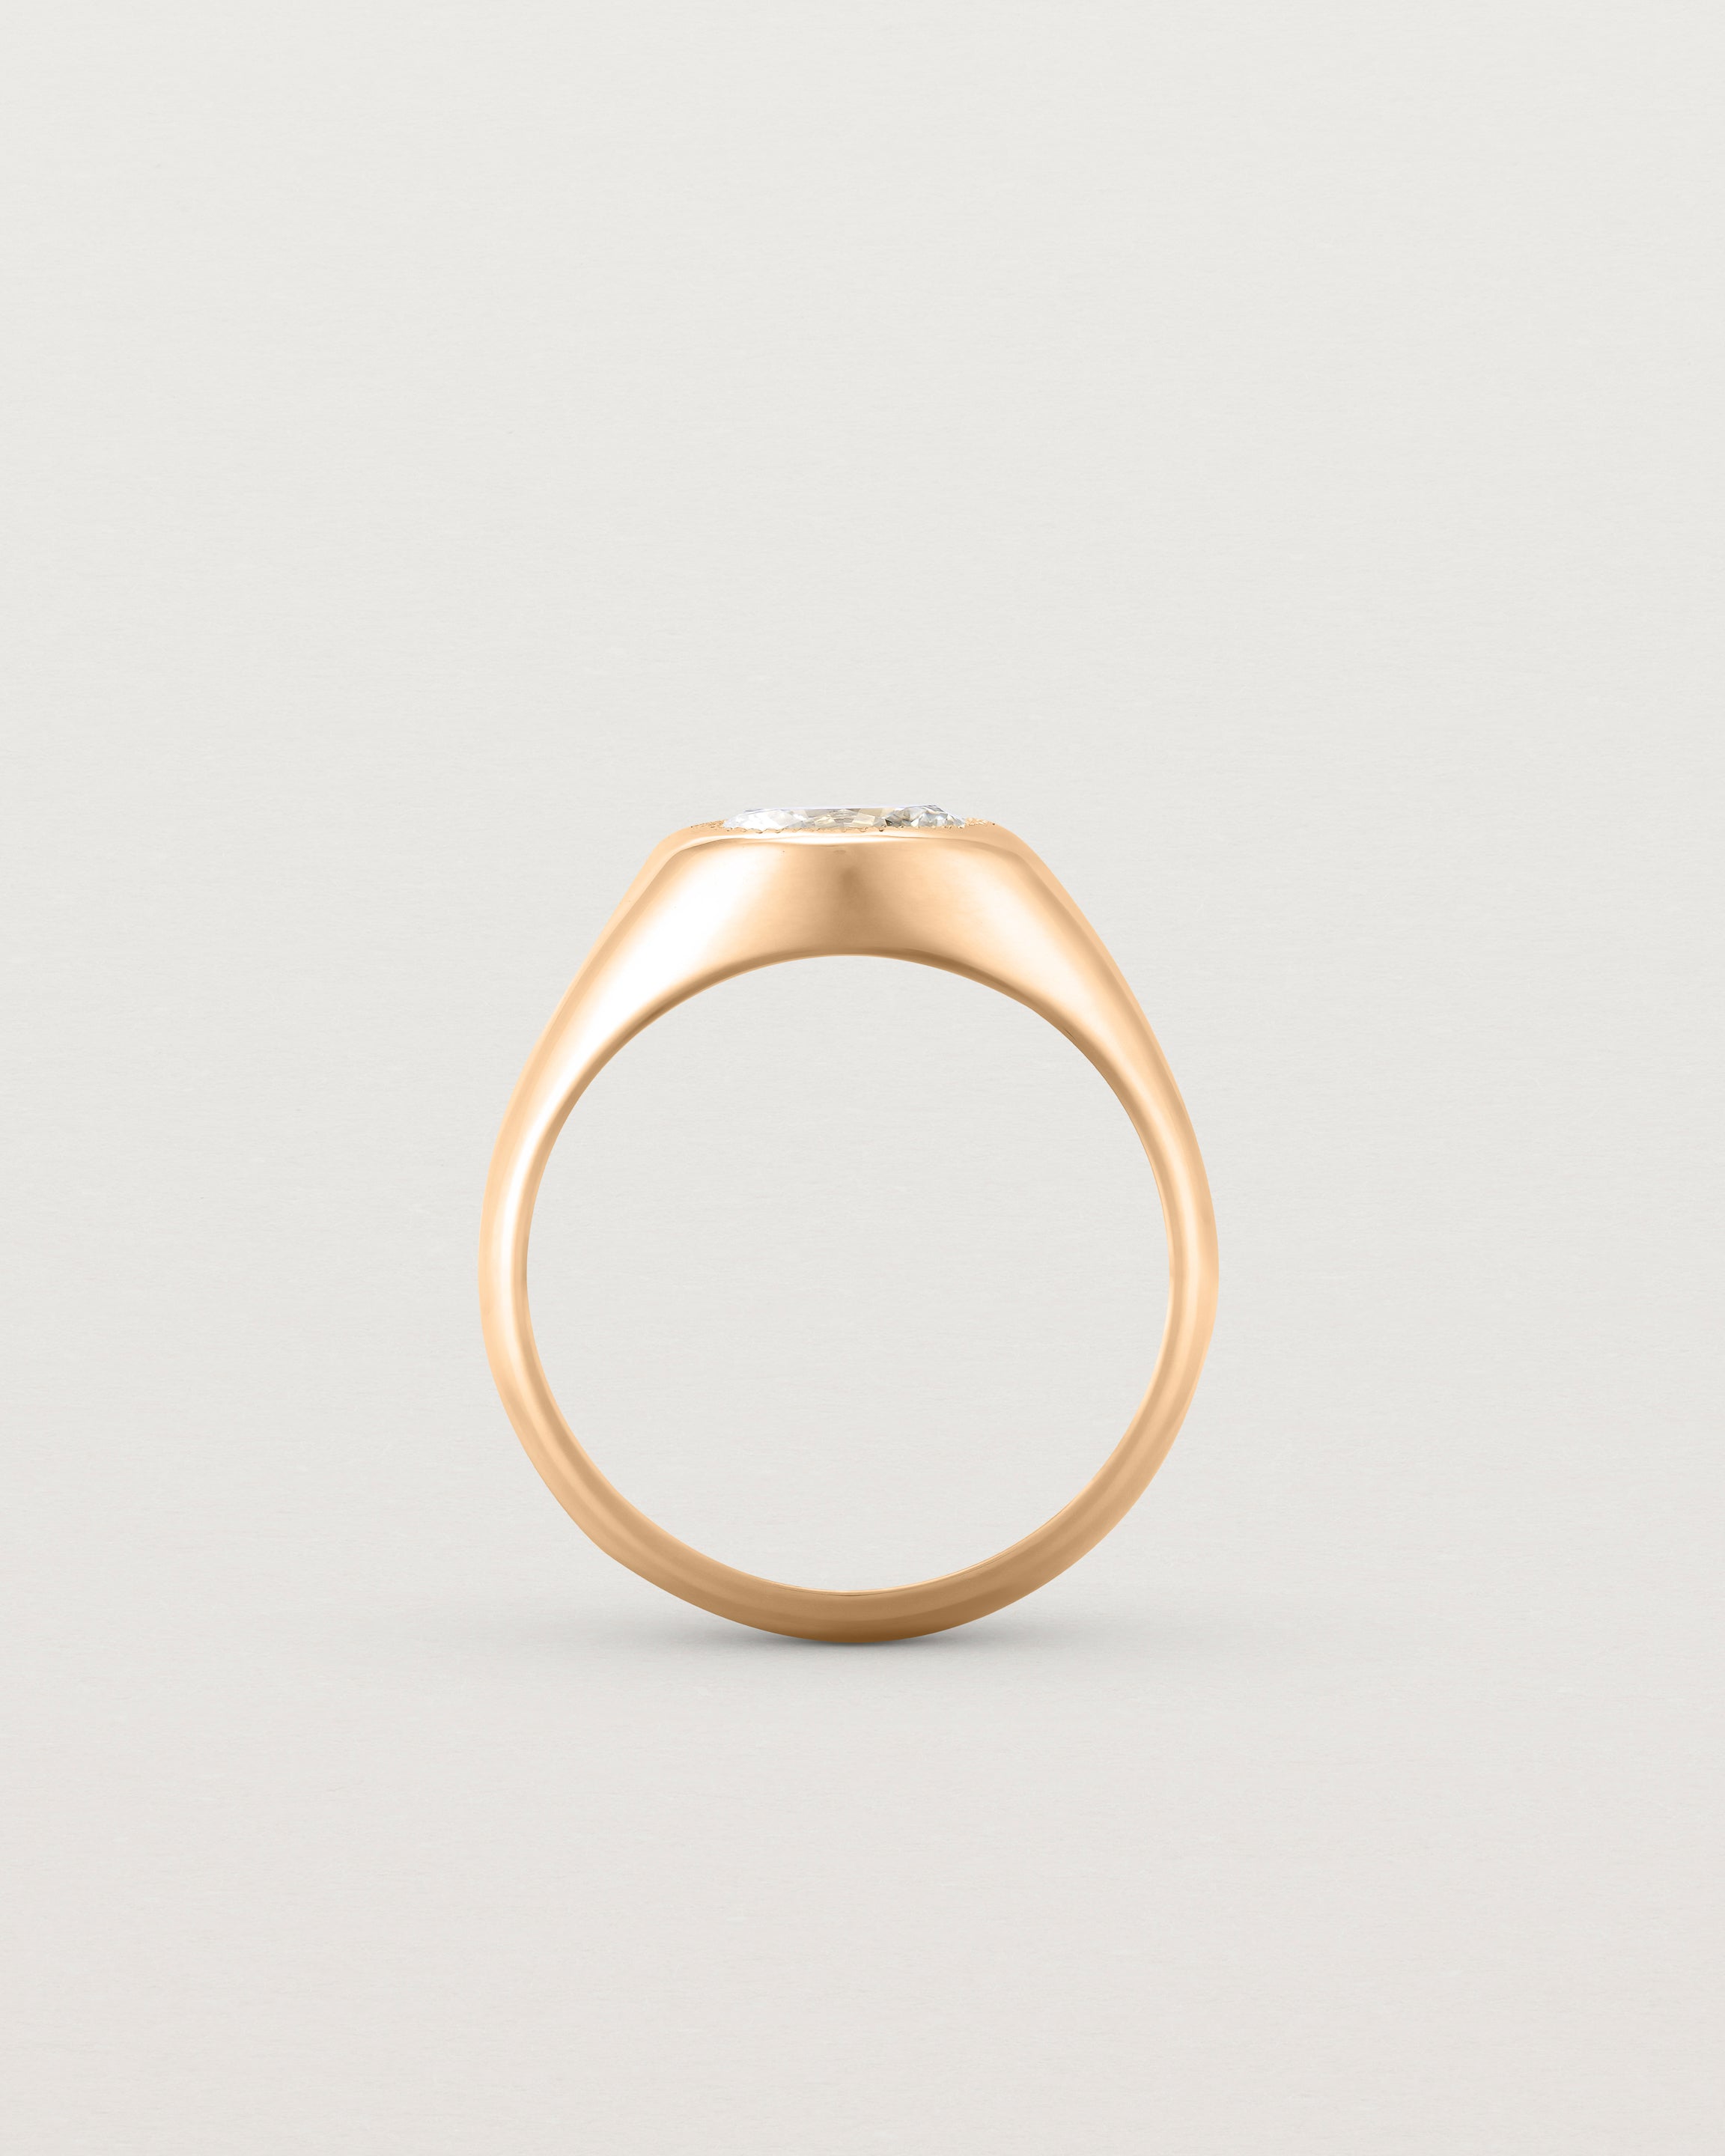 Standing view of the Átlas Oval Signet | Laboratory Grown Diamond in rose gold, with a polished finish.